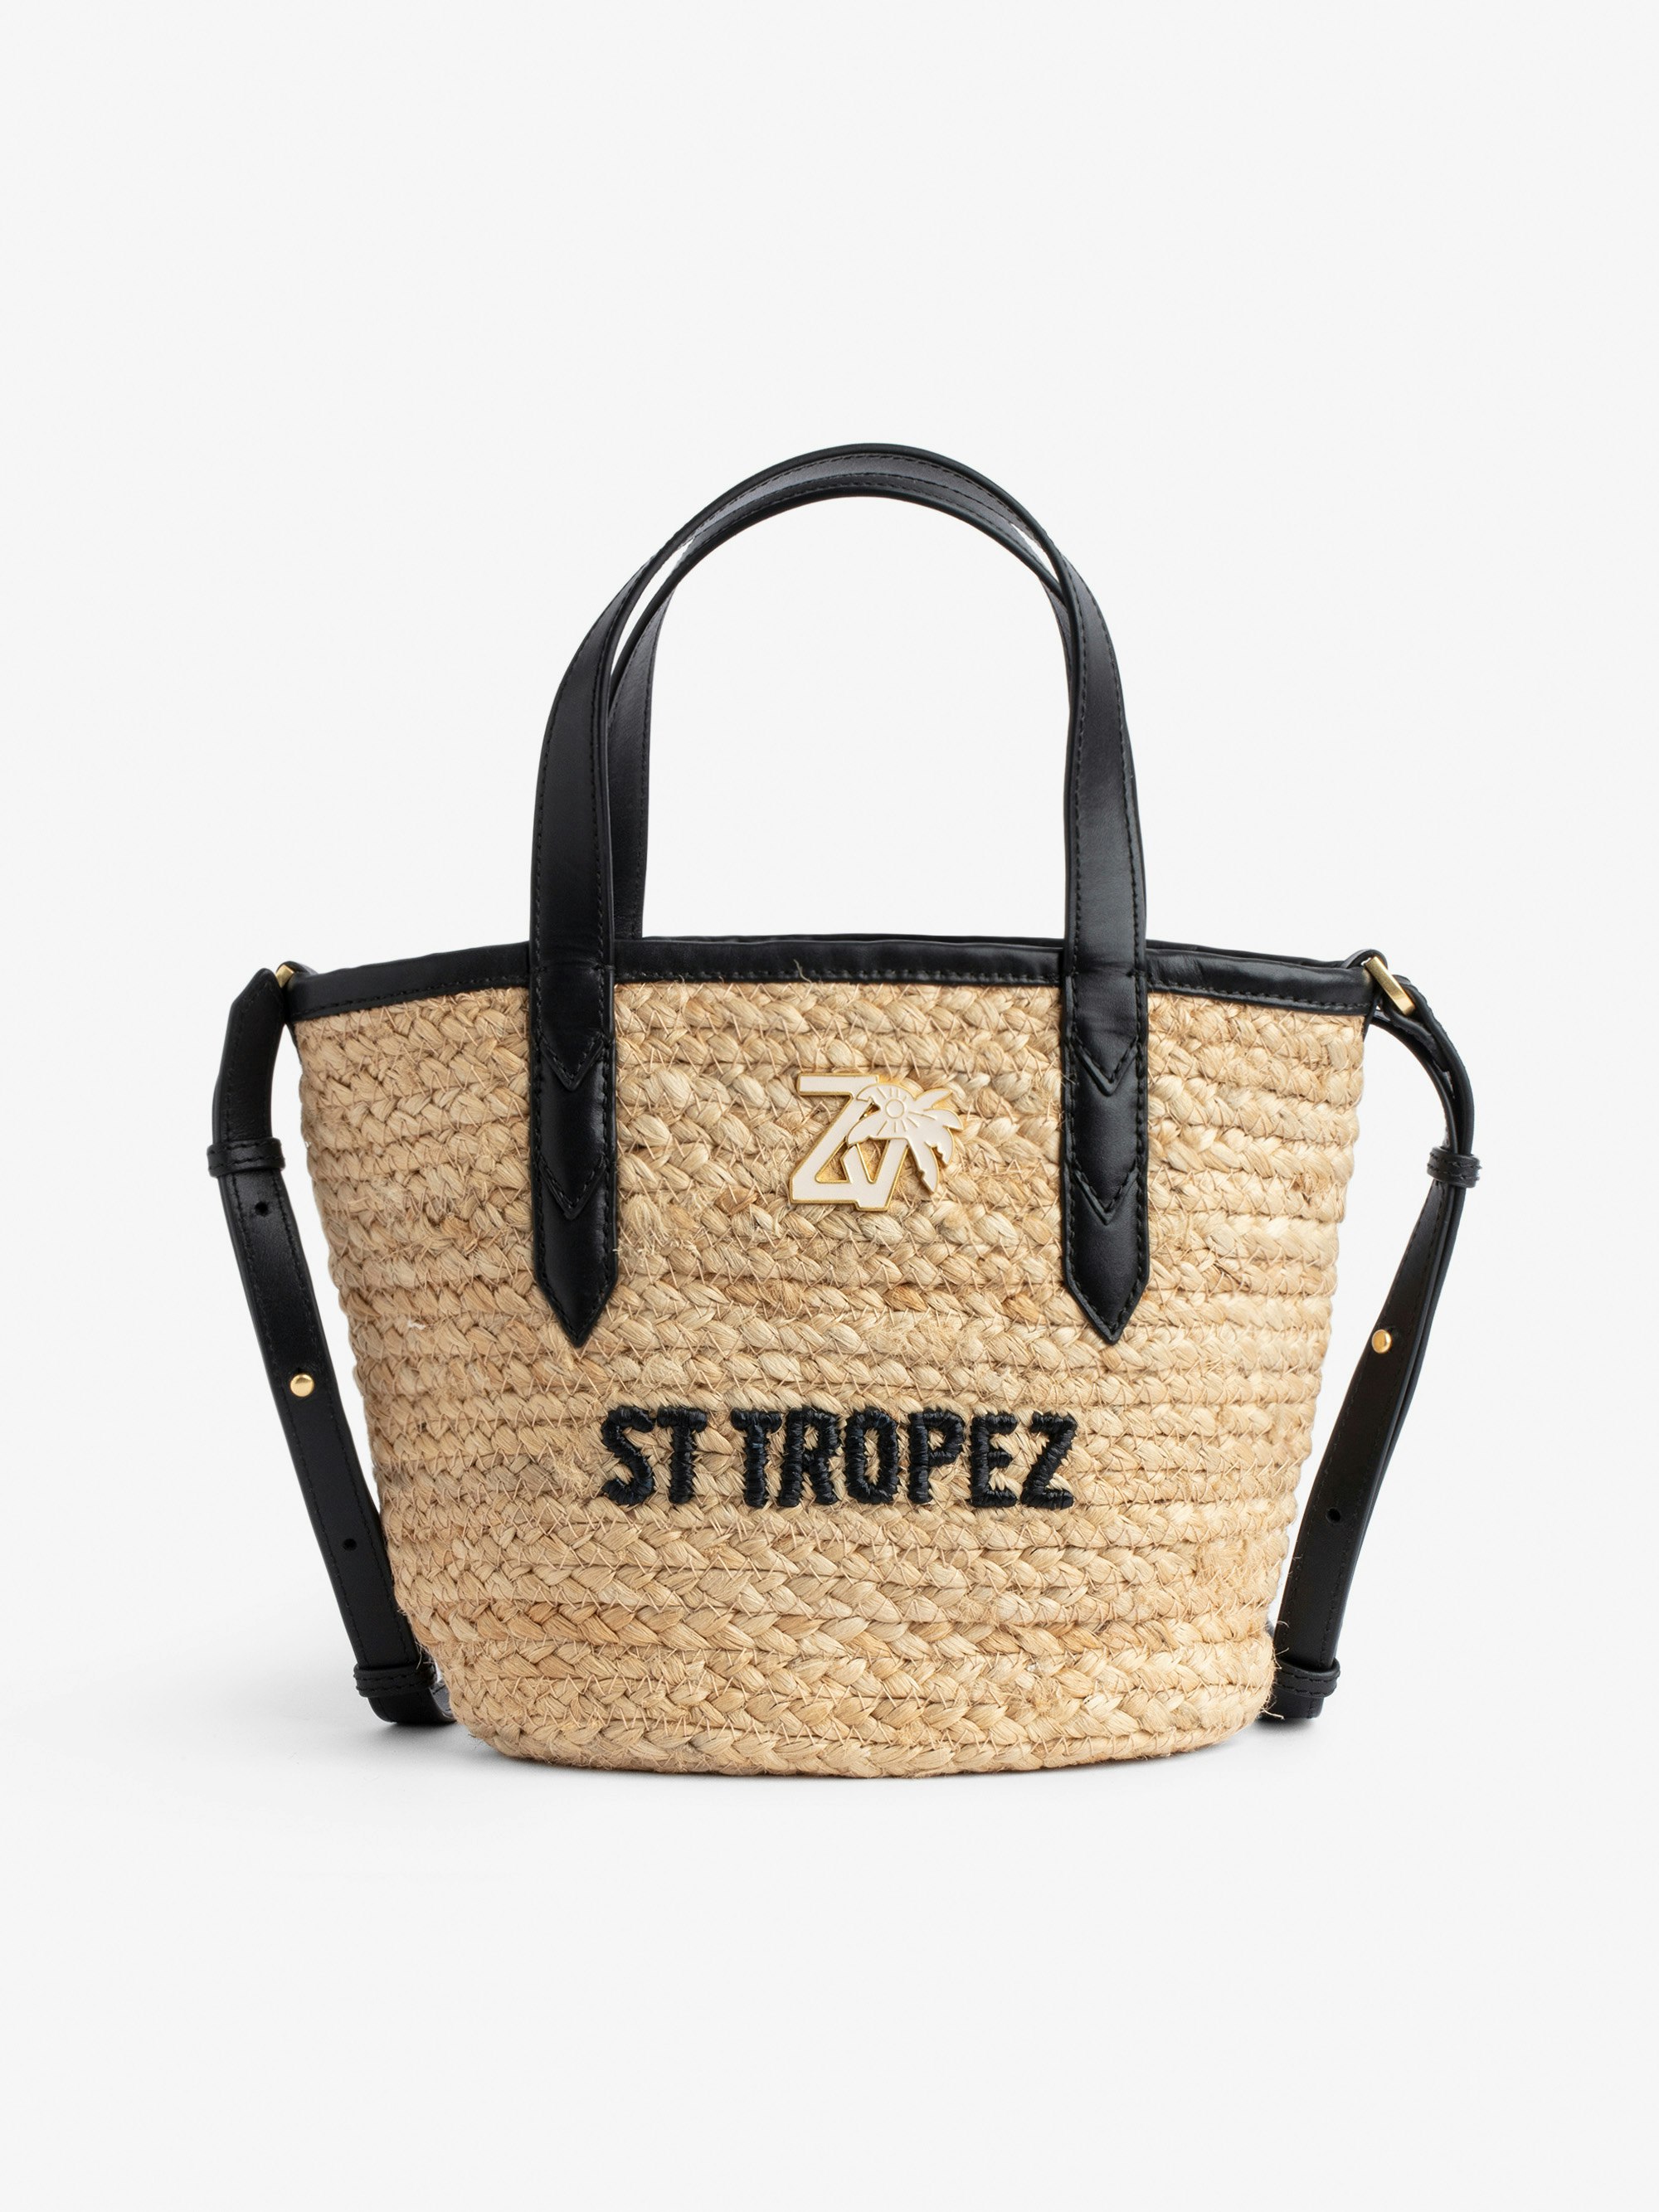 Le Baby Beach Bag - Women's straw bag with black leather shoulder strap, "St Tropez" embroidery and ZV charm